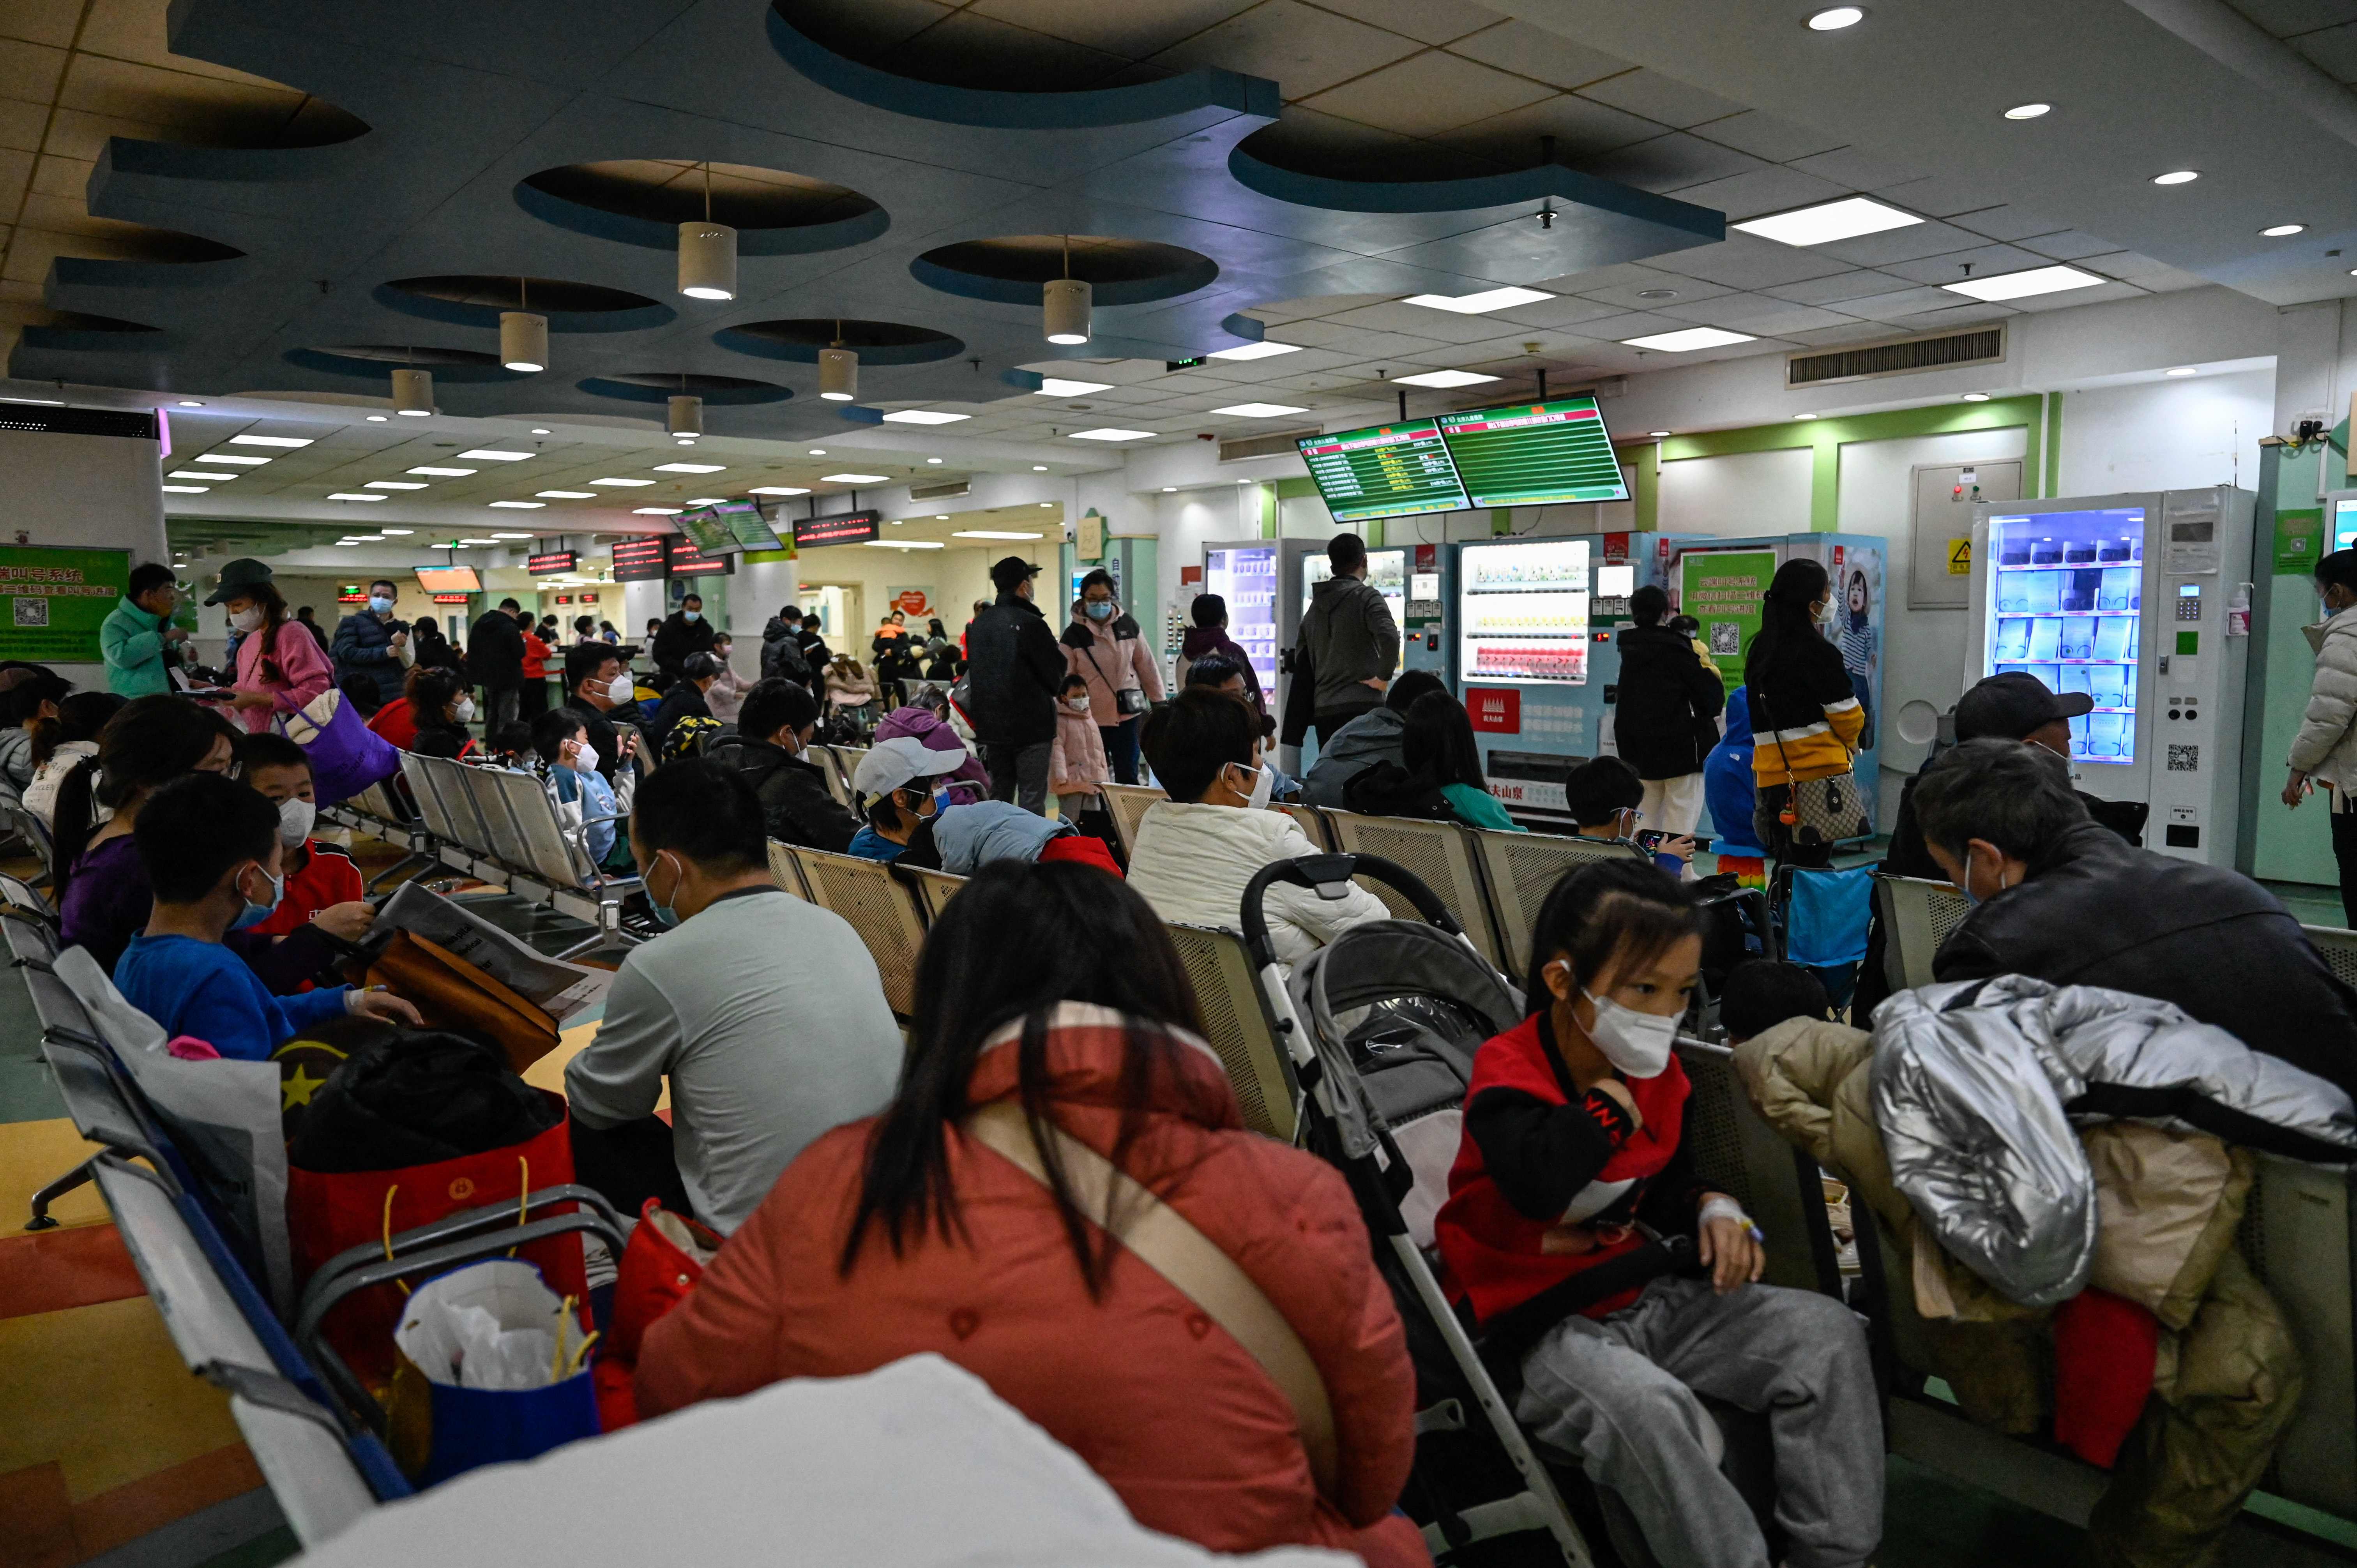 Children and their parents wait at an outpatient area at a children’s hospital in Beijing on 23 November